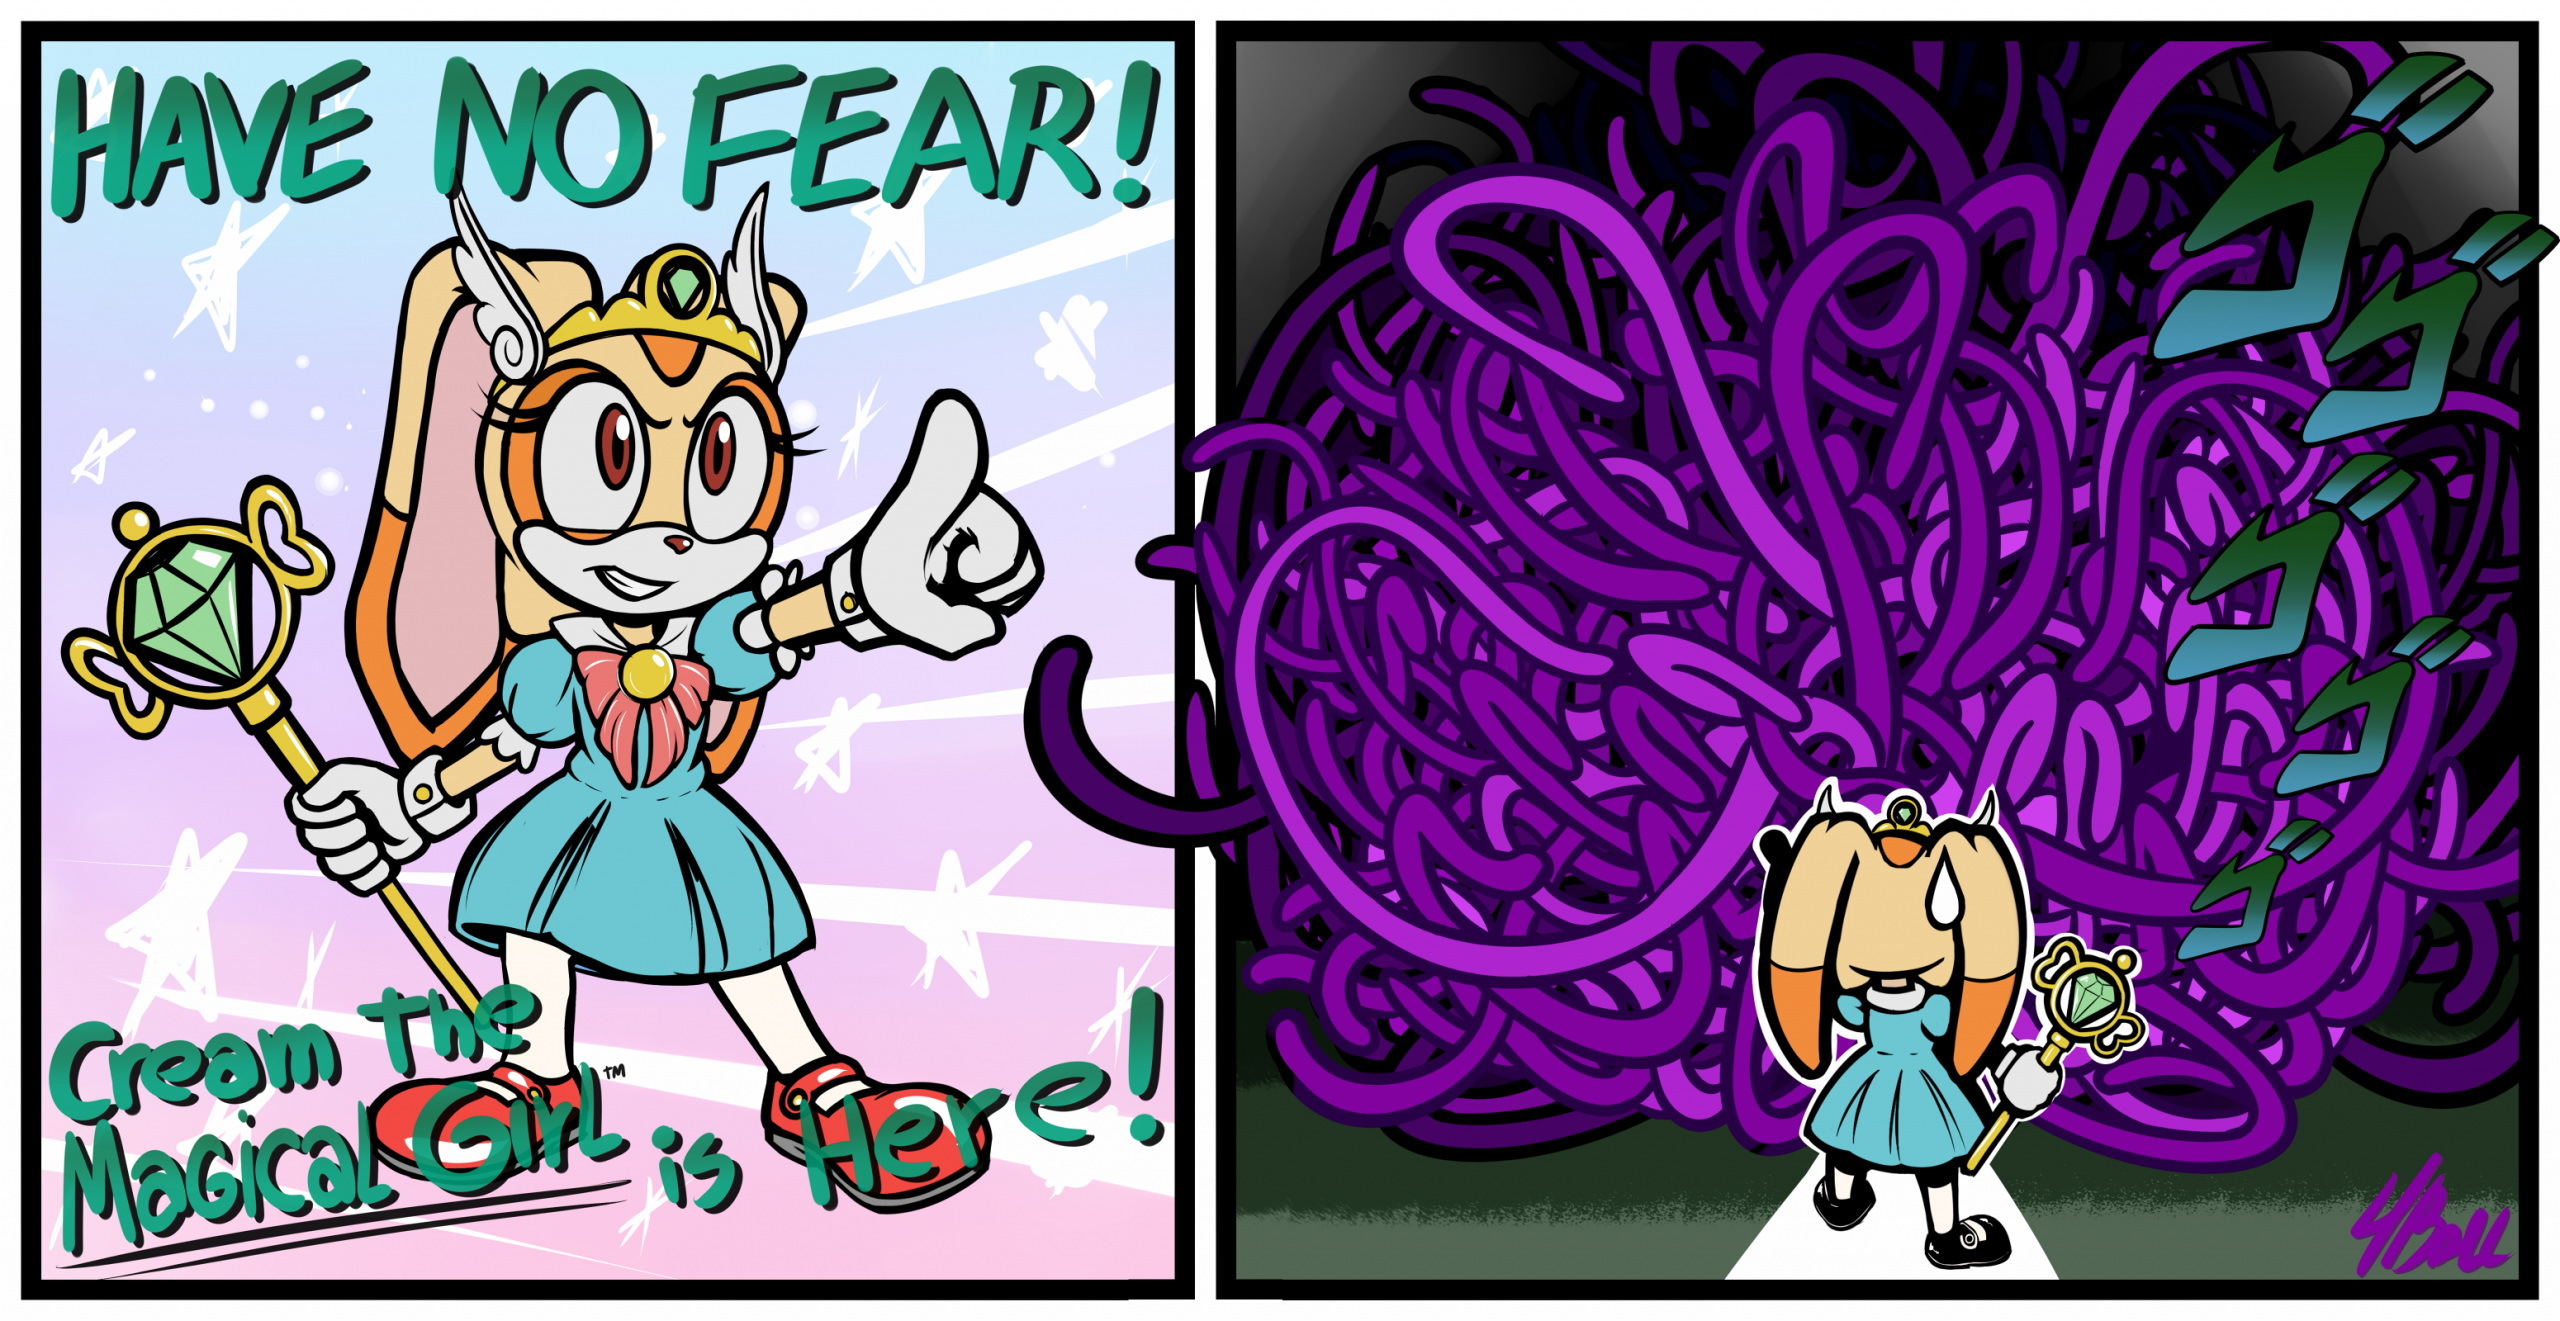 Cream the Magical Girl Saves the Day? - Page 1